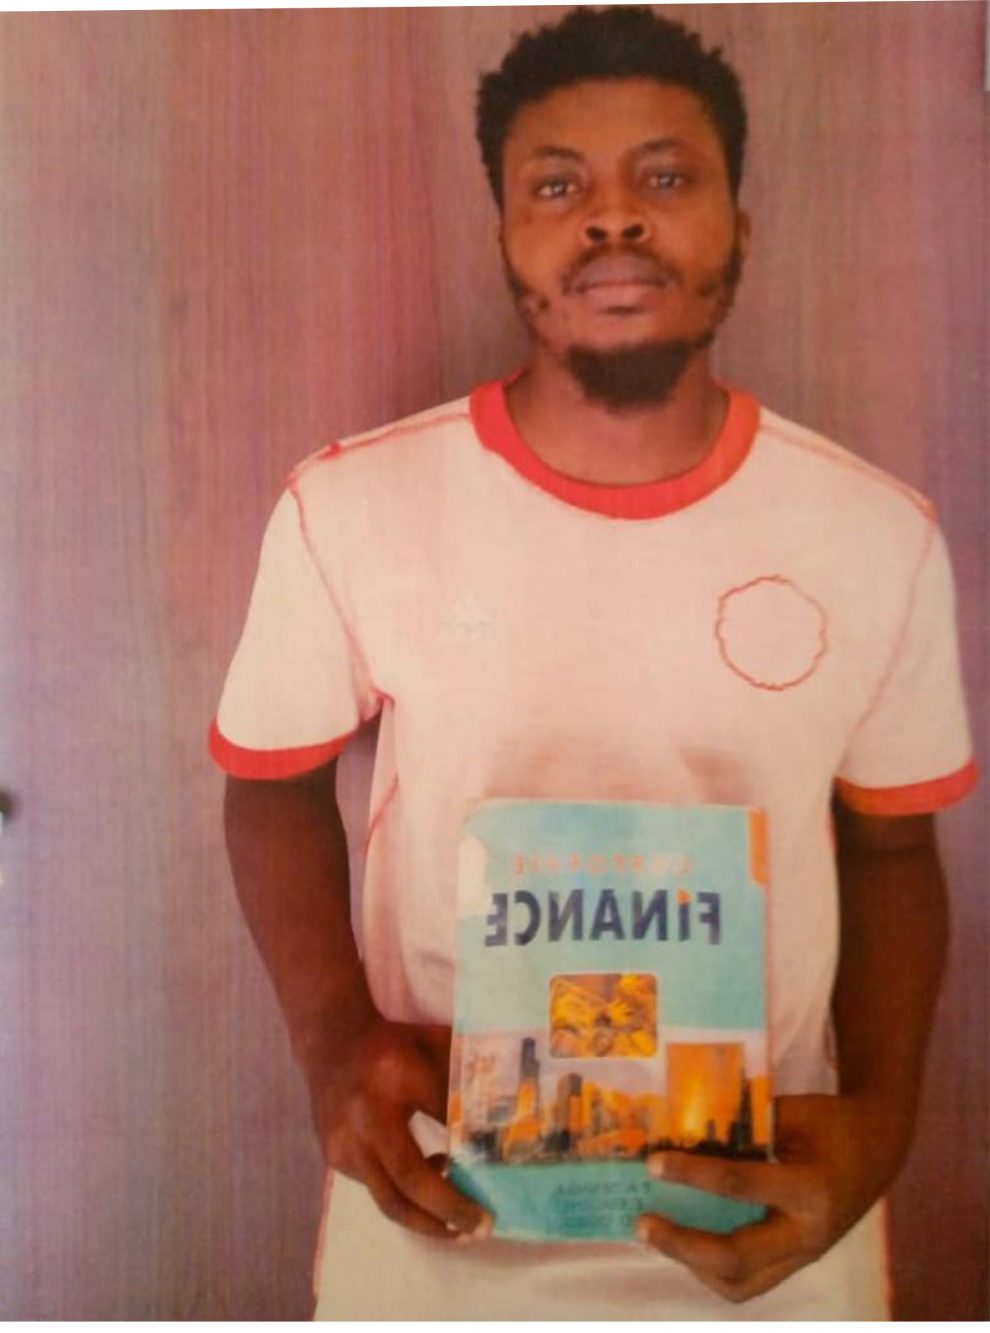 Abel Godwin Idio a 400 level undergraduate of Federal University of Technology, Minna, selling psychotropic substances with the aid of his textbooks